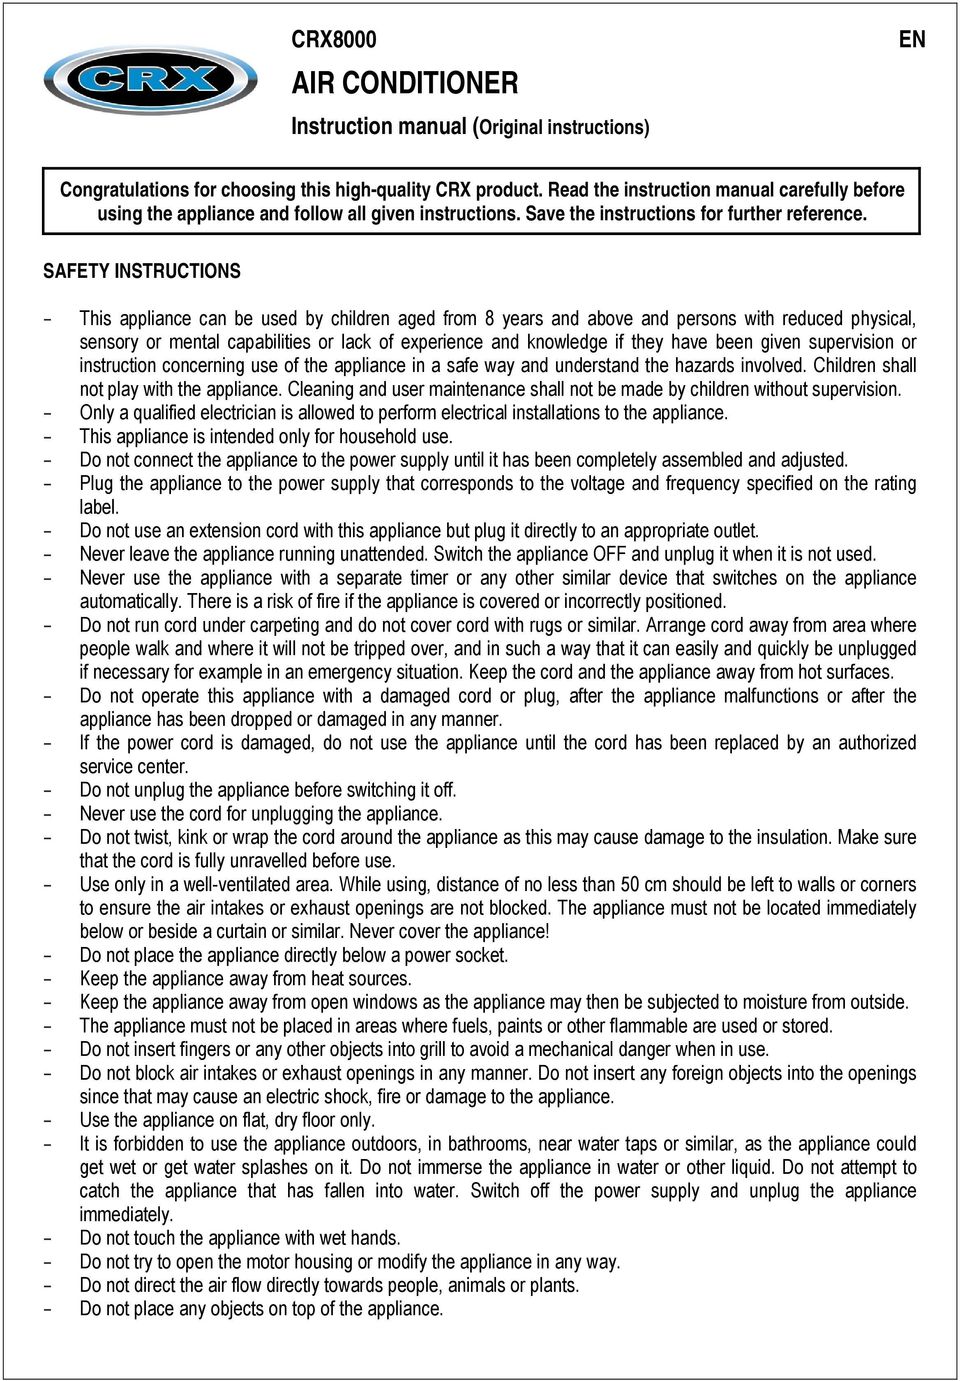 SAFETY INSTRUCTIONS - This appliance can be used by children aged from 8 years and above and persons with reduced physical, sensory or mental capabilities or lack of experience and knowledge if they